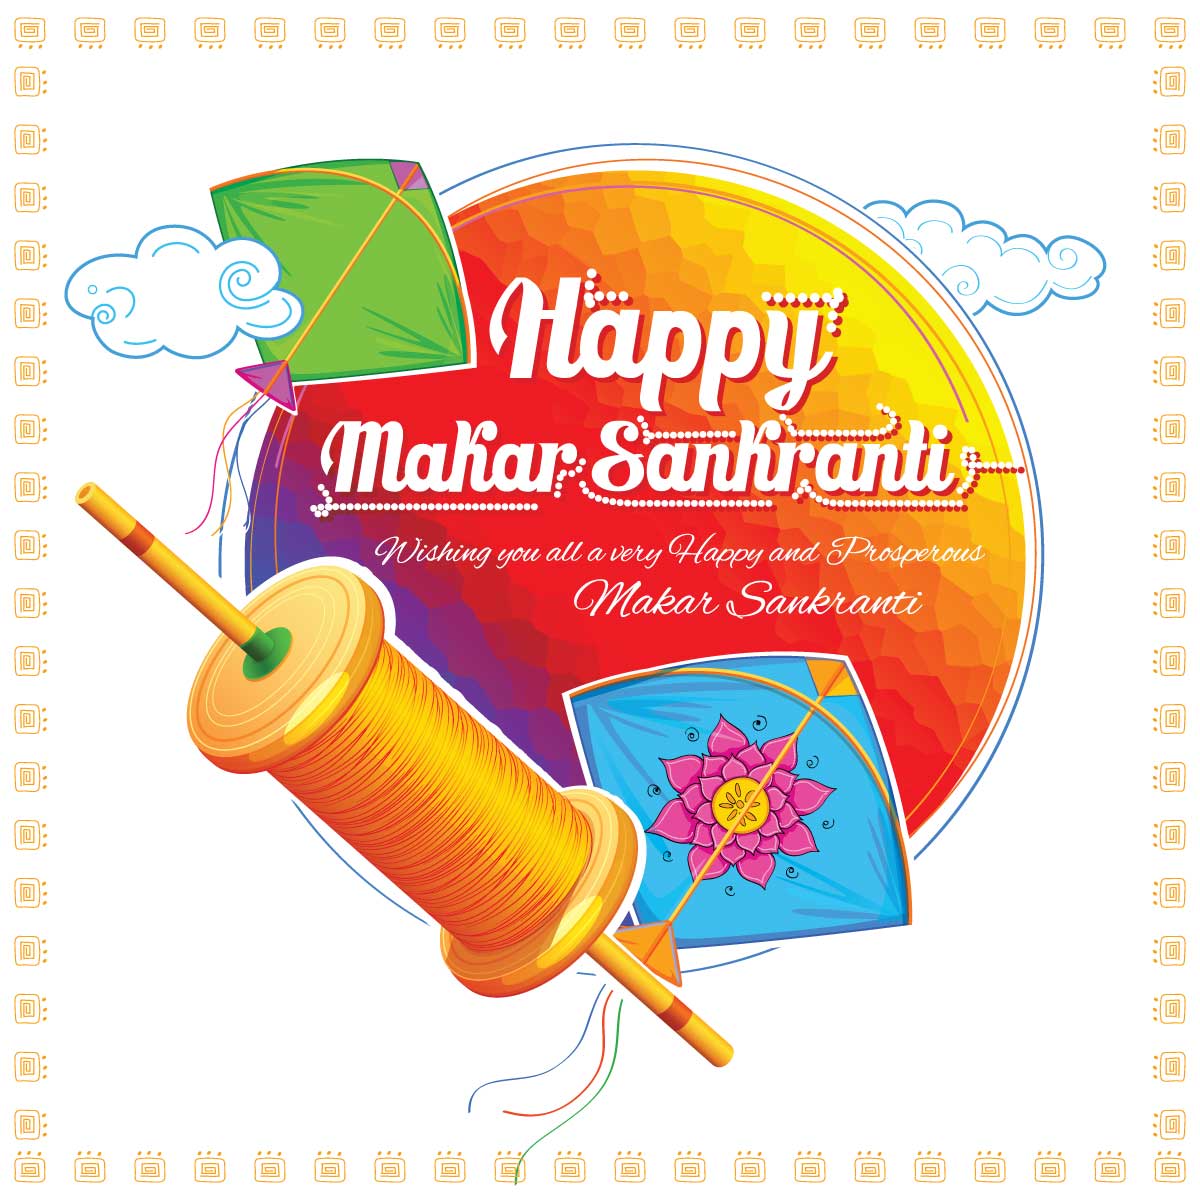 Happy Makar Sankranti wallpaper with colorful kite for festival of India -  Indiater